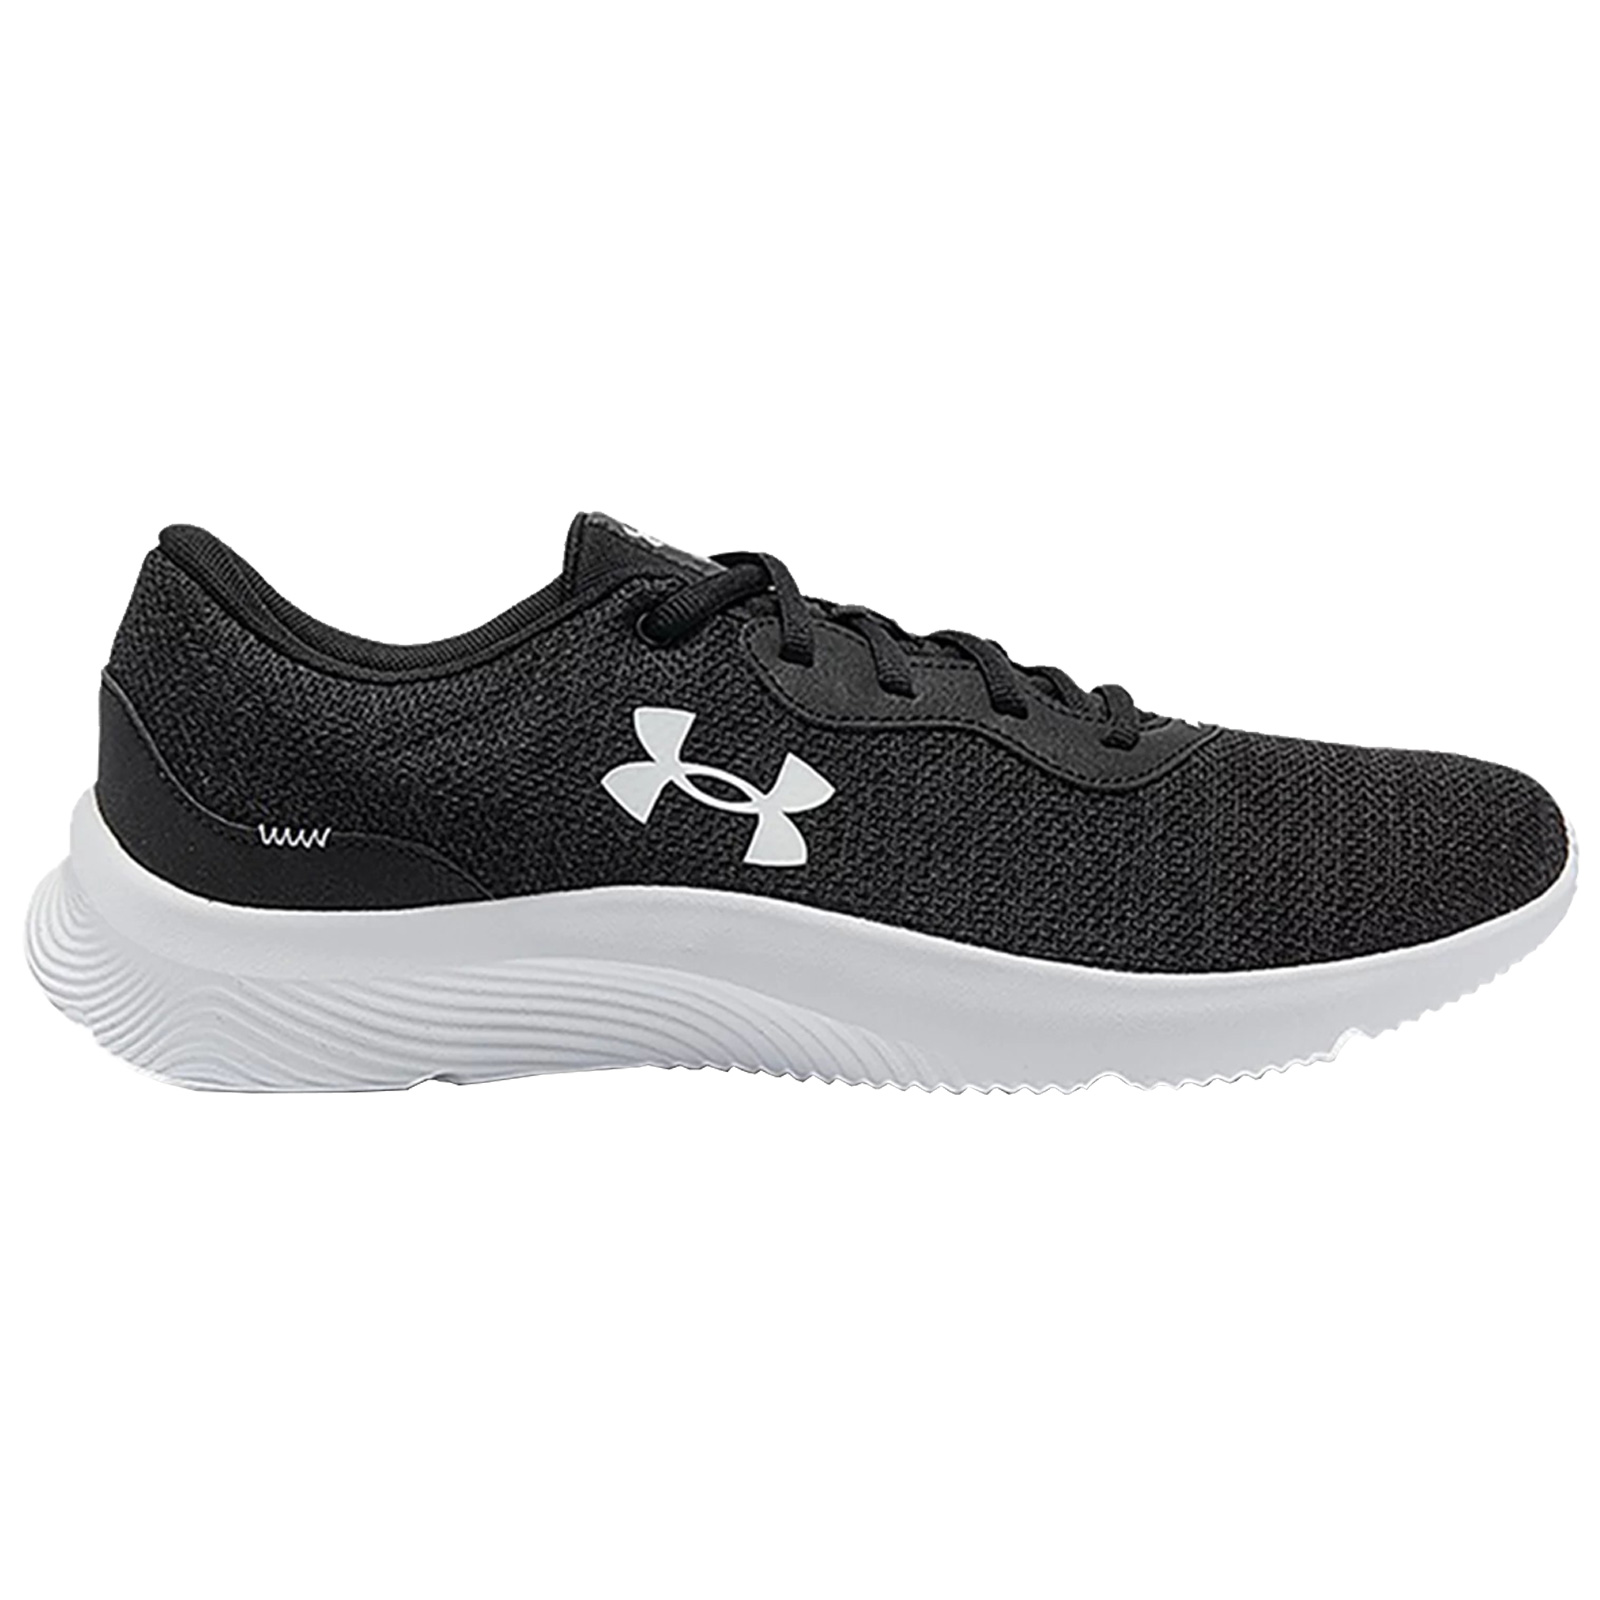 2021 Under Armour Mens Mojo 2 Sportstyle Trainers UA Gym Running Shoes ...